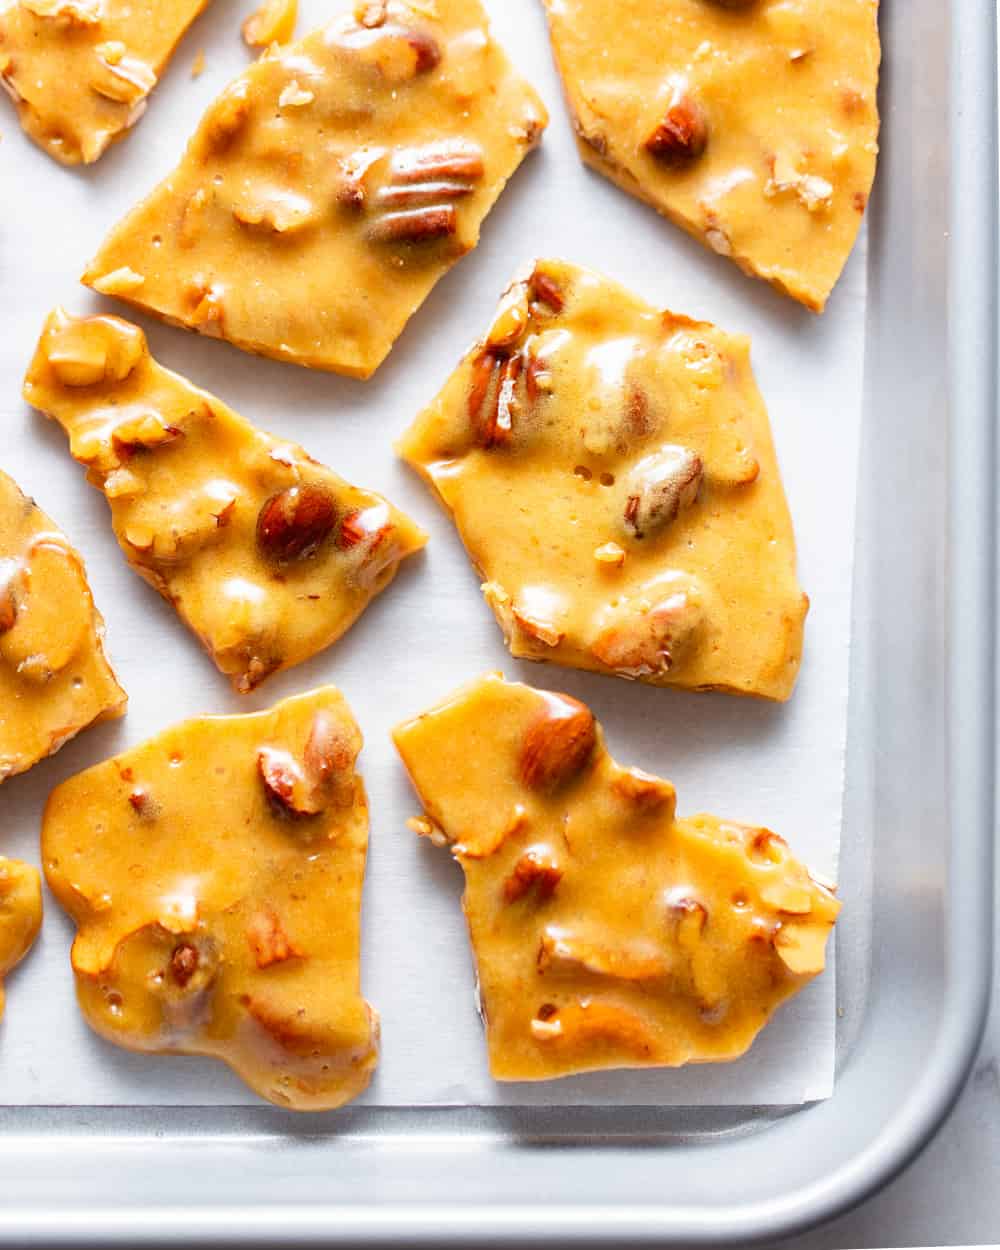 Make a batch of Nut Brittle to gift during the holiday season.